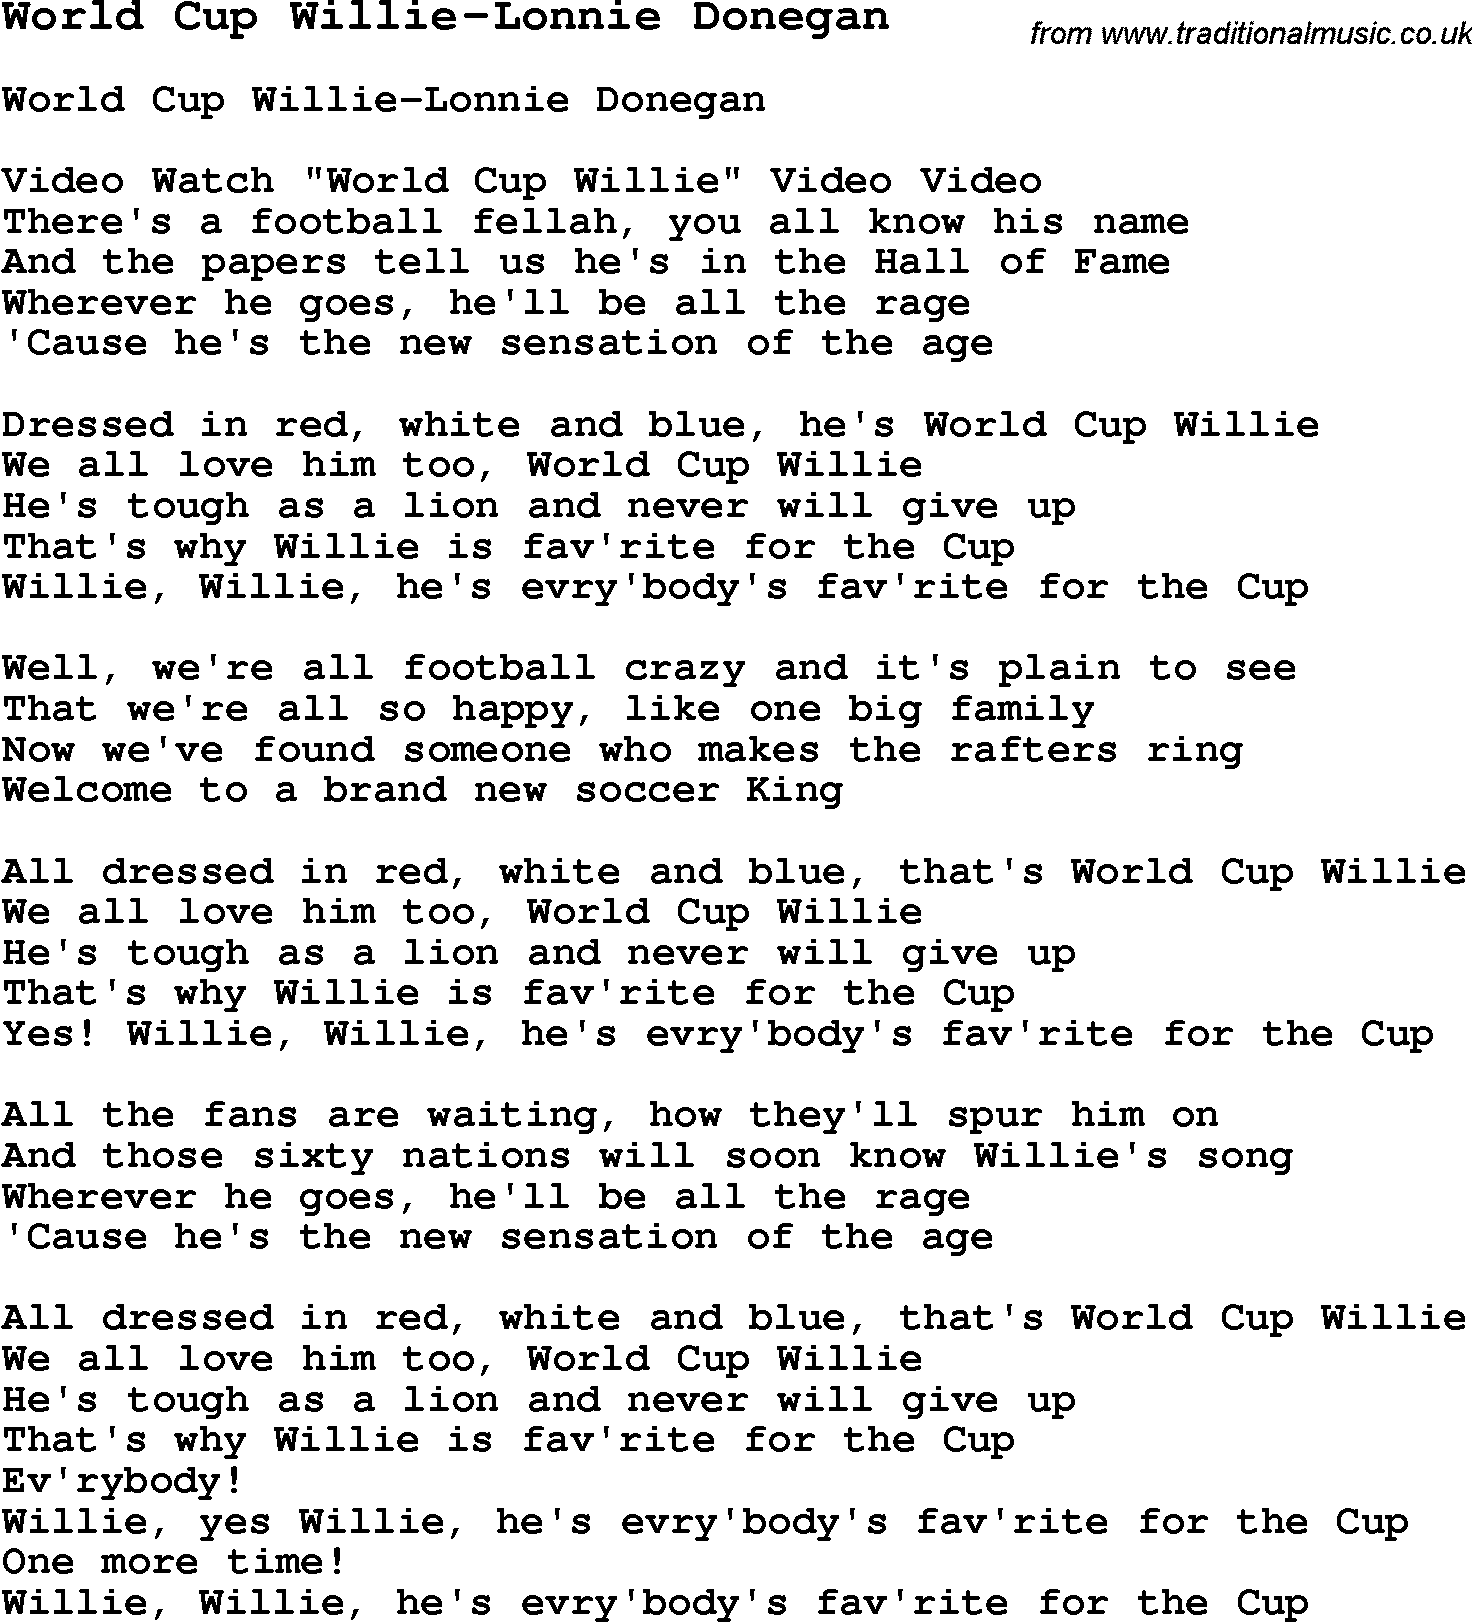 Skiffle Song Lyrics for World Cup Willie-Lonnie Donegan.